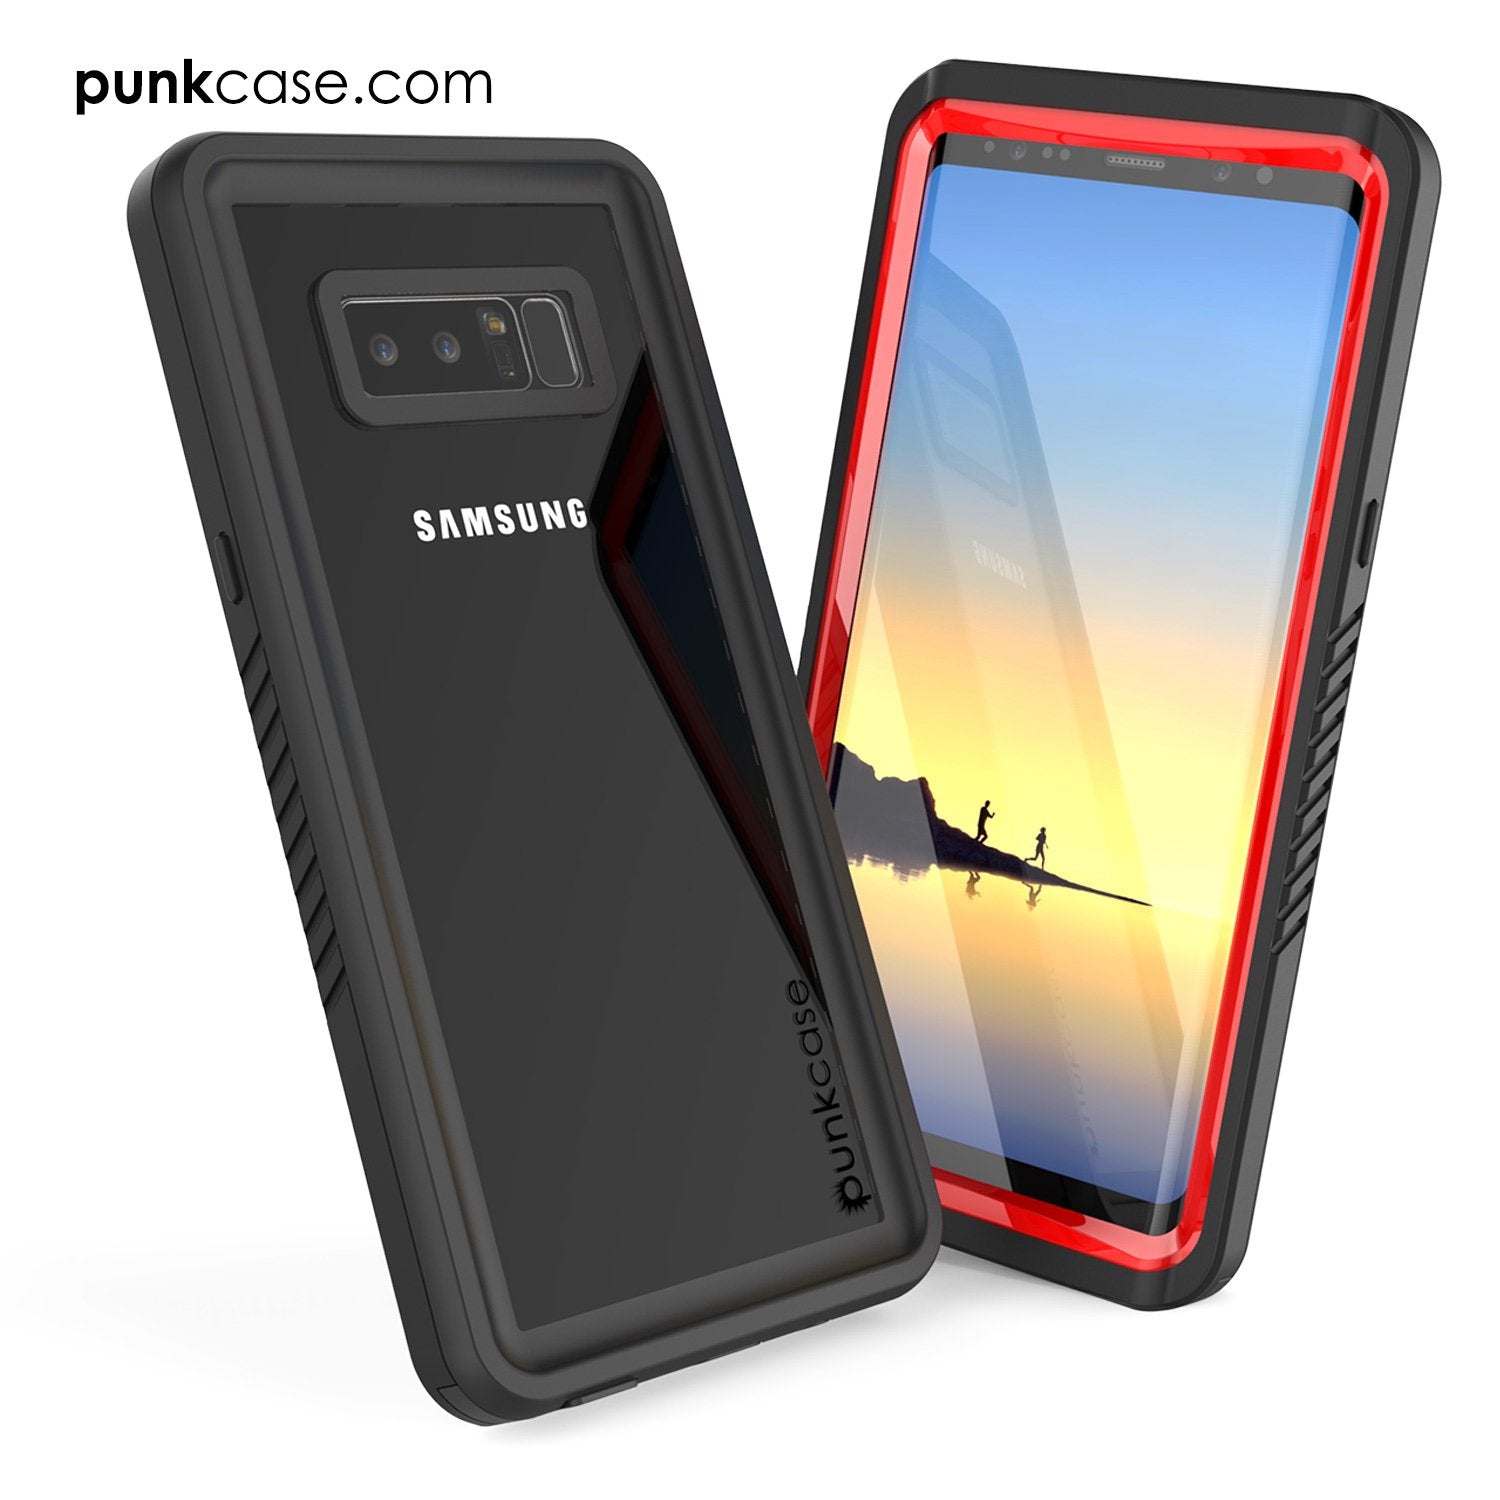 Galaxy Note 8 Waterproof Case, Punkcase [Extreme Series] [Slim] [Red]